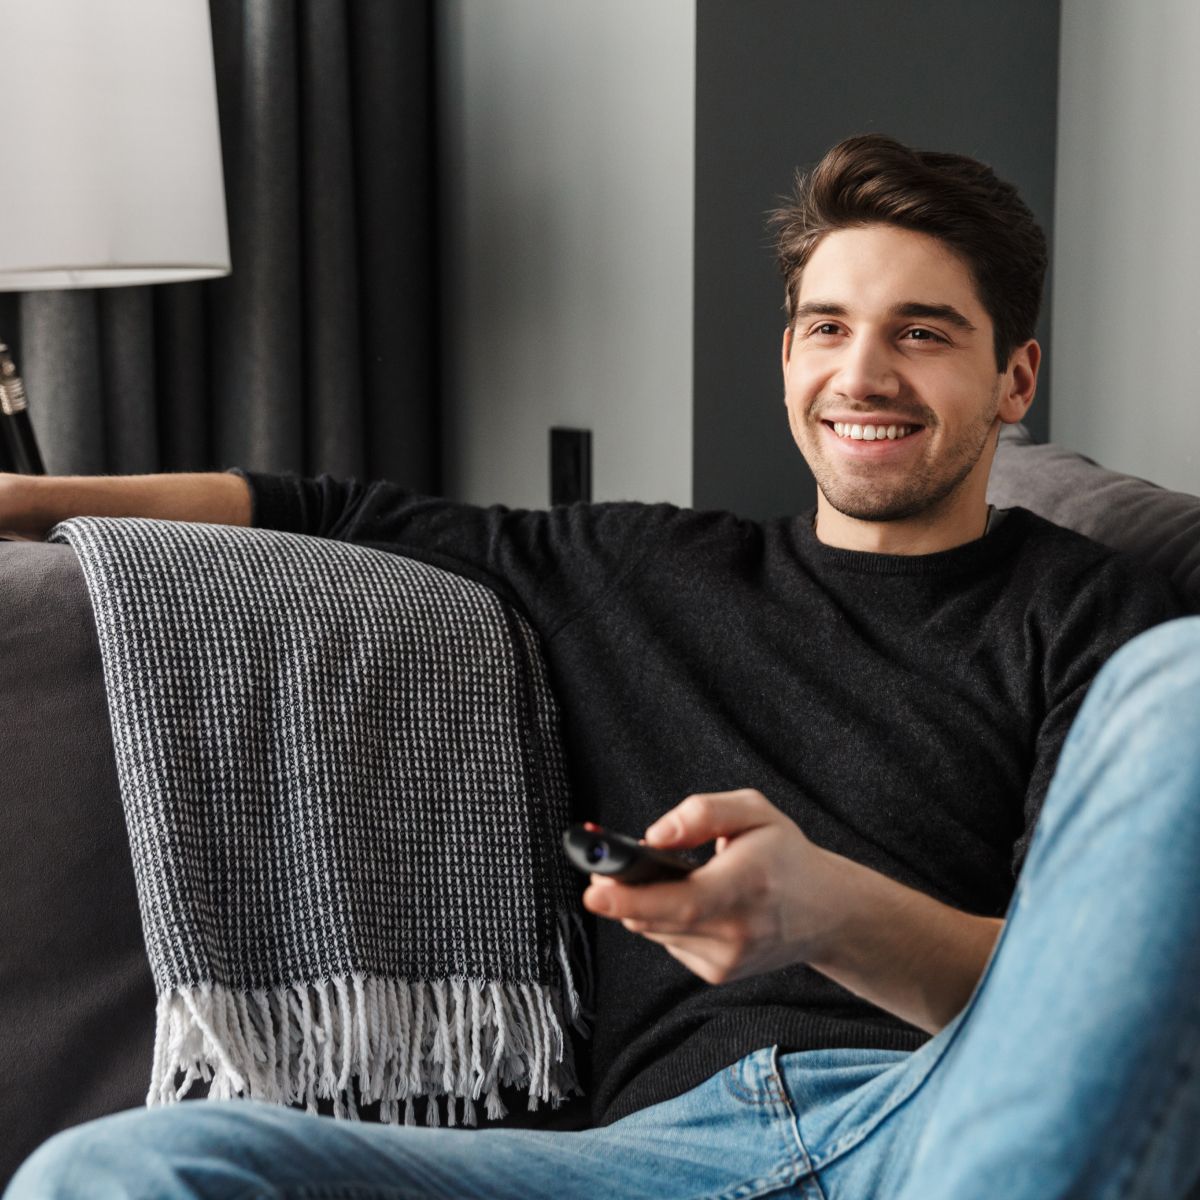 Man smiling watching TV on couch with remote